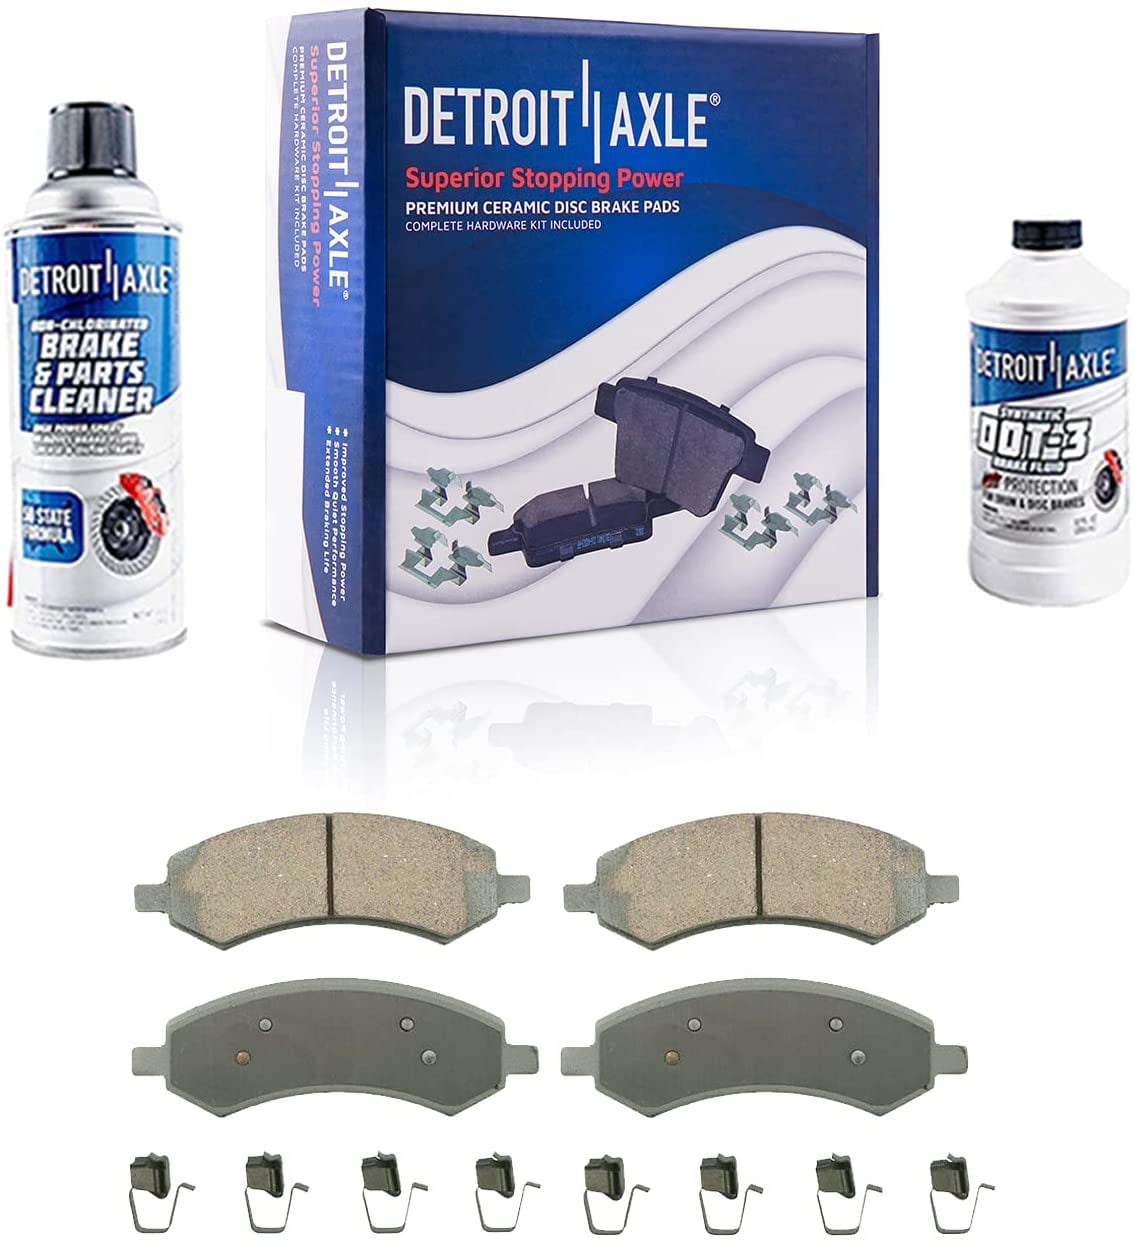 Brake Pads Replacement for Dodge Ram 1500 2500 3500-6pc Set Front Drilled Slotted Rotors Detroit Axle 